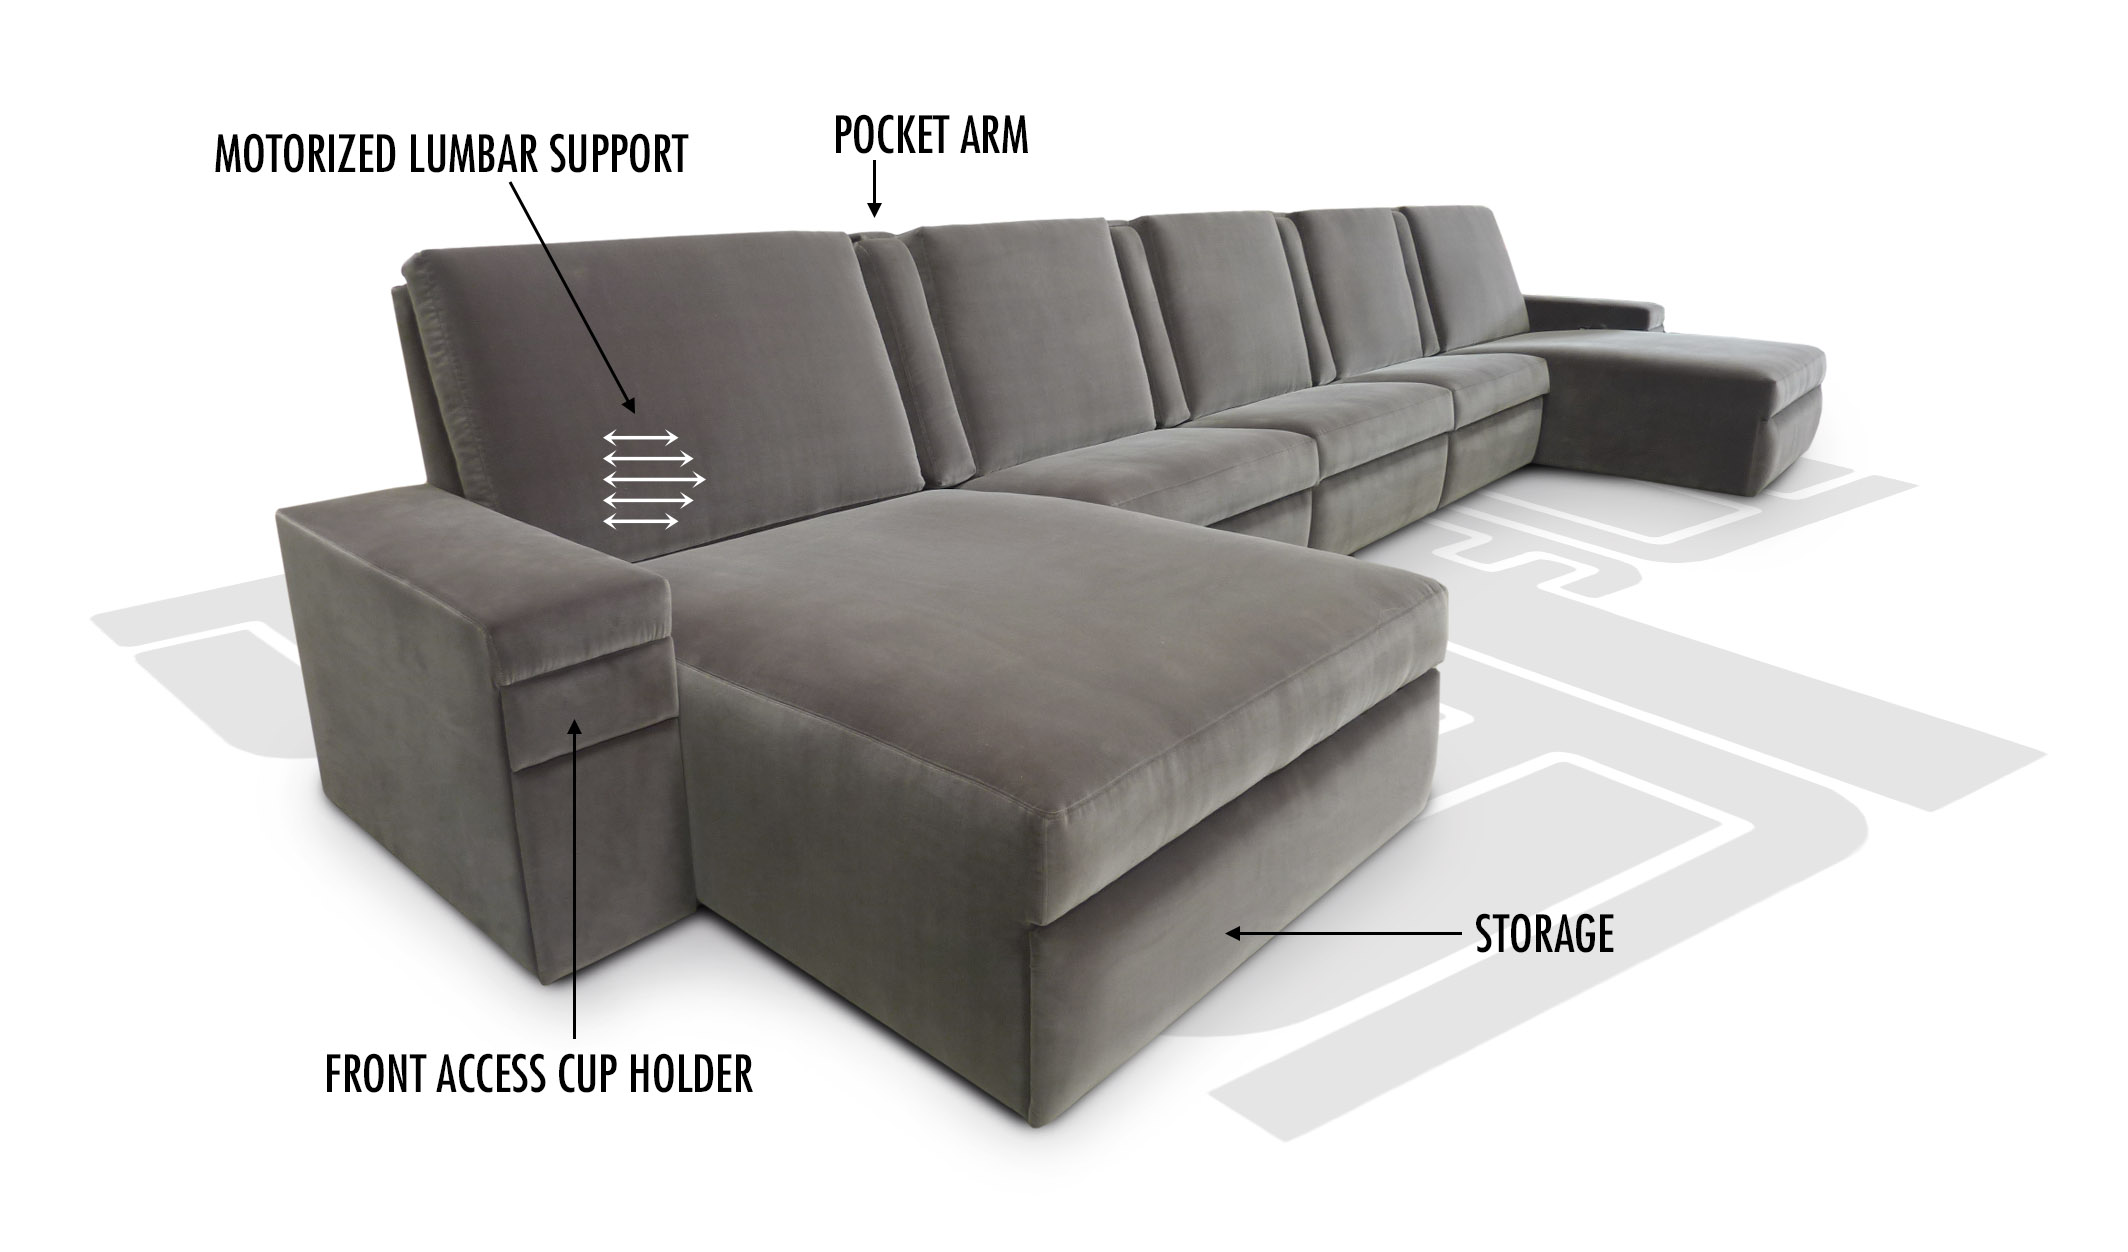   Motorized Lumbar Support. Model: Bel Aire Sectional   